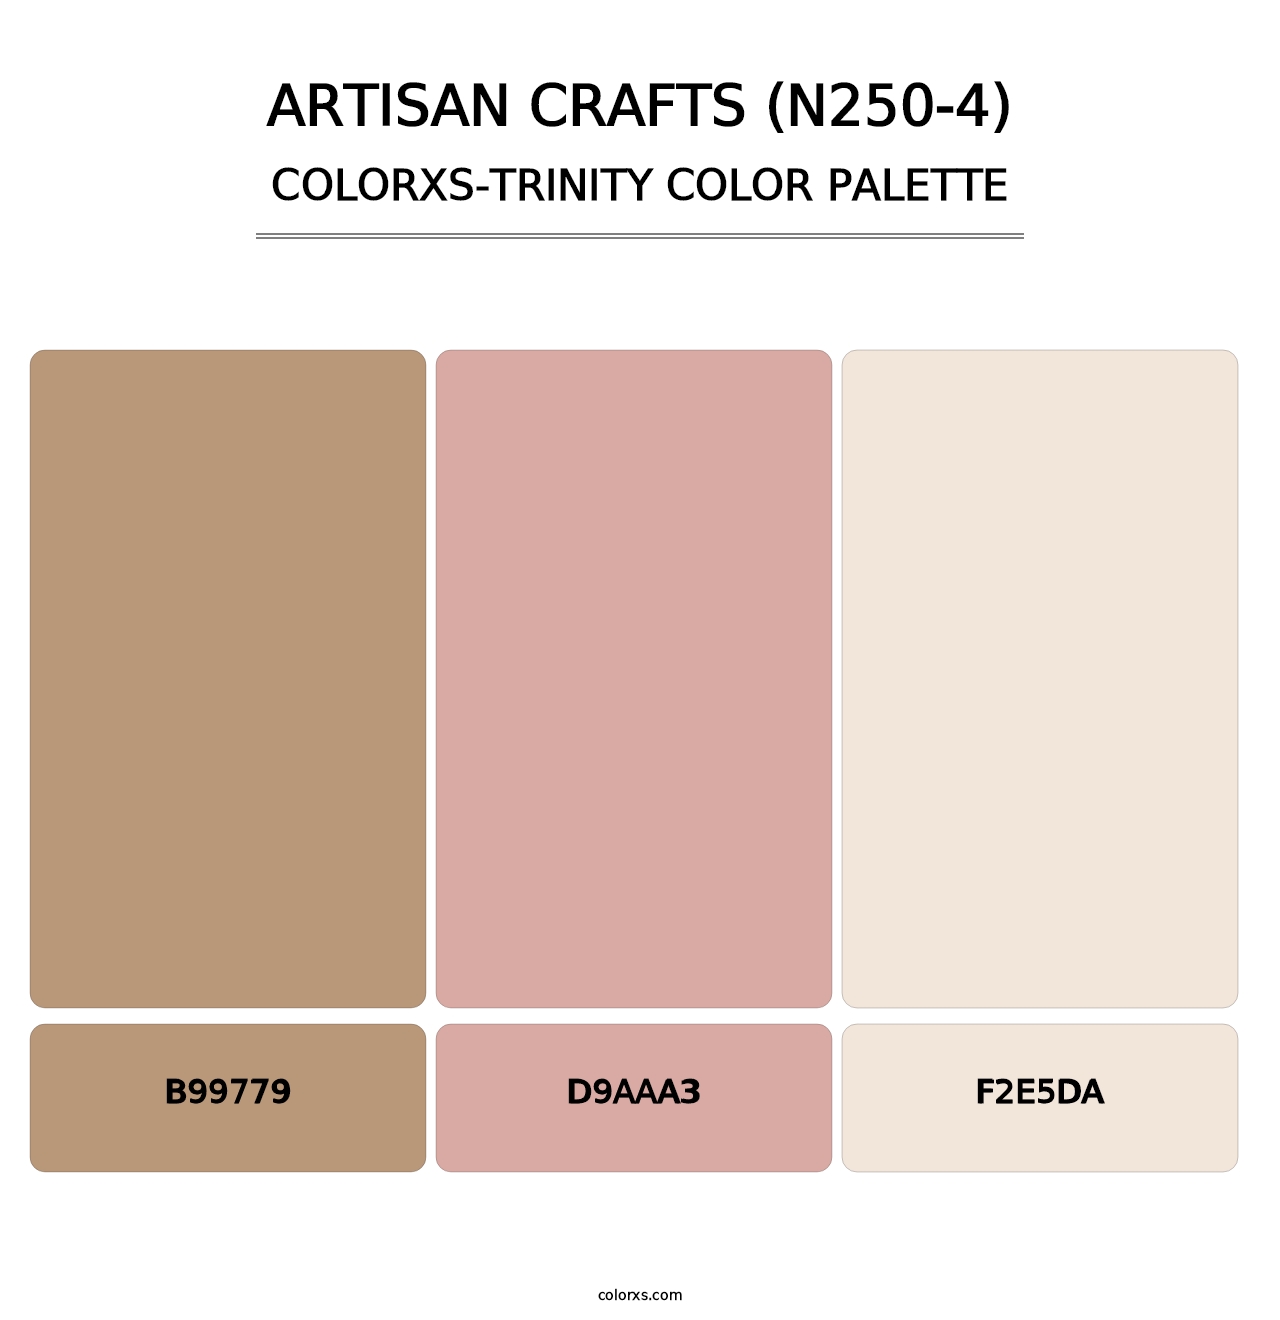 Artisan Crafts (N250-4) - Colorxs Trinity Palette